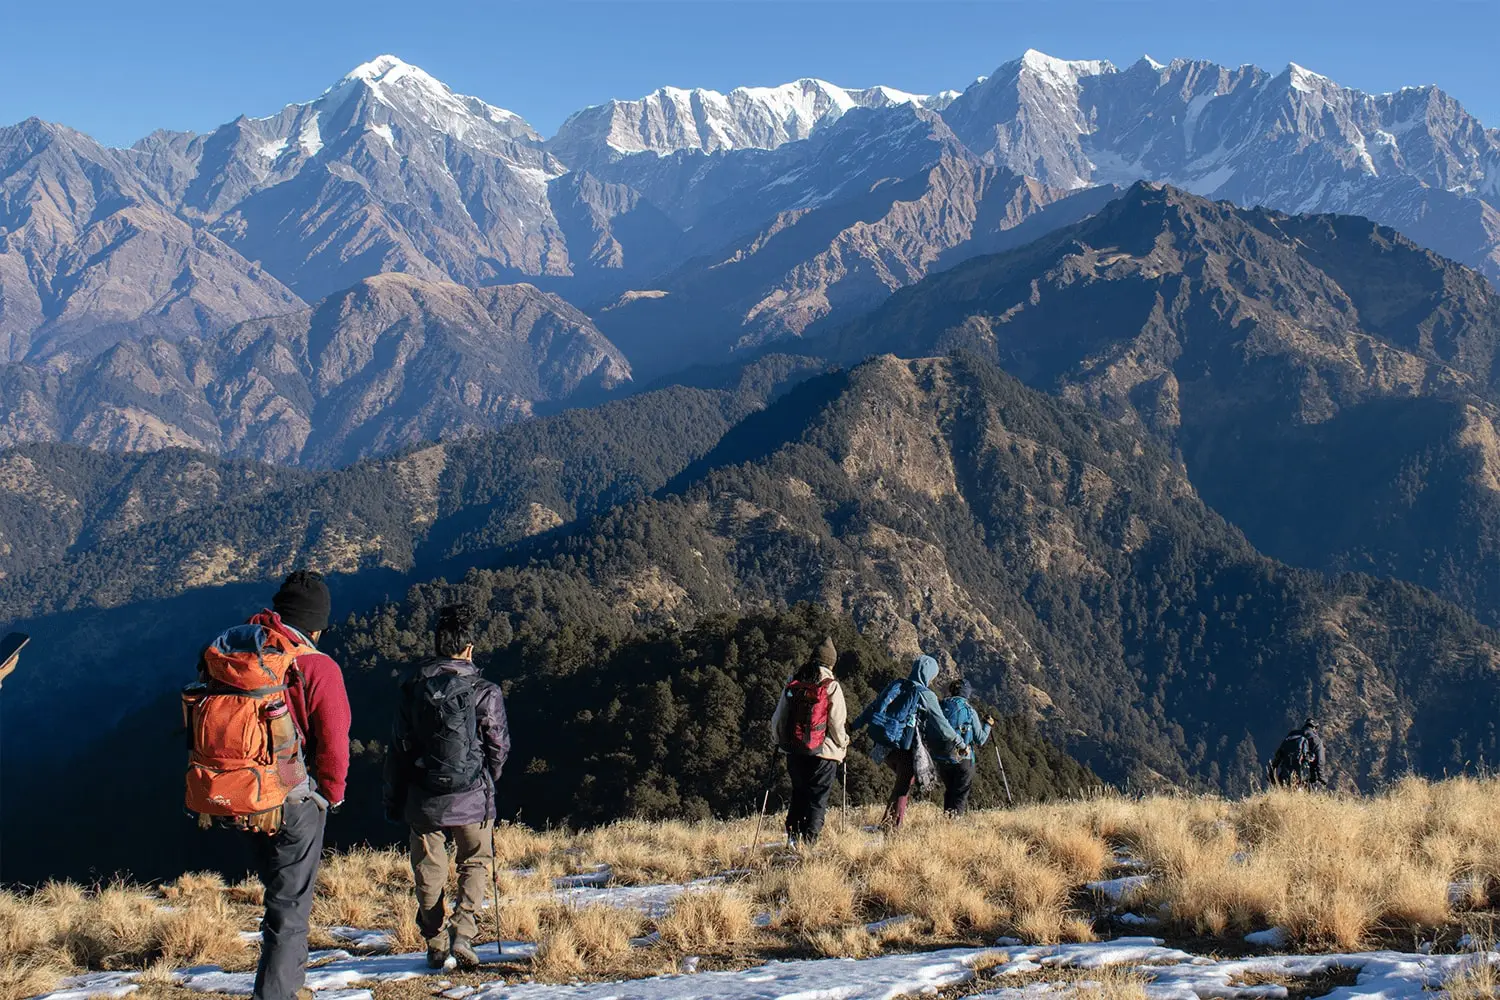 A group of trekkers navigates a less trodden path on Bagji Bugyal Trek, with towering mountains in the background.